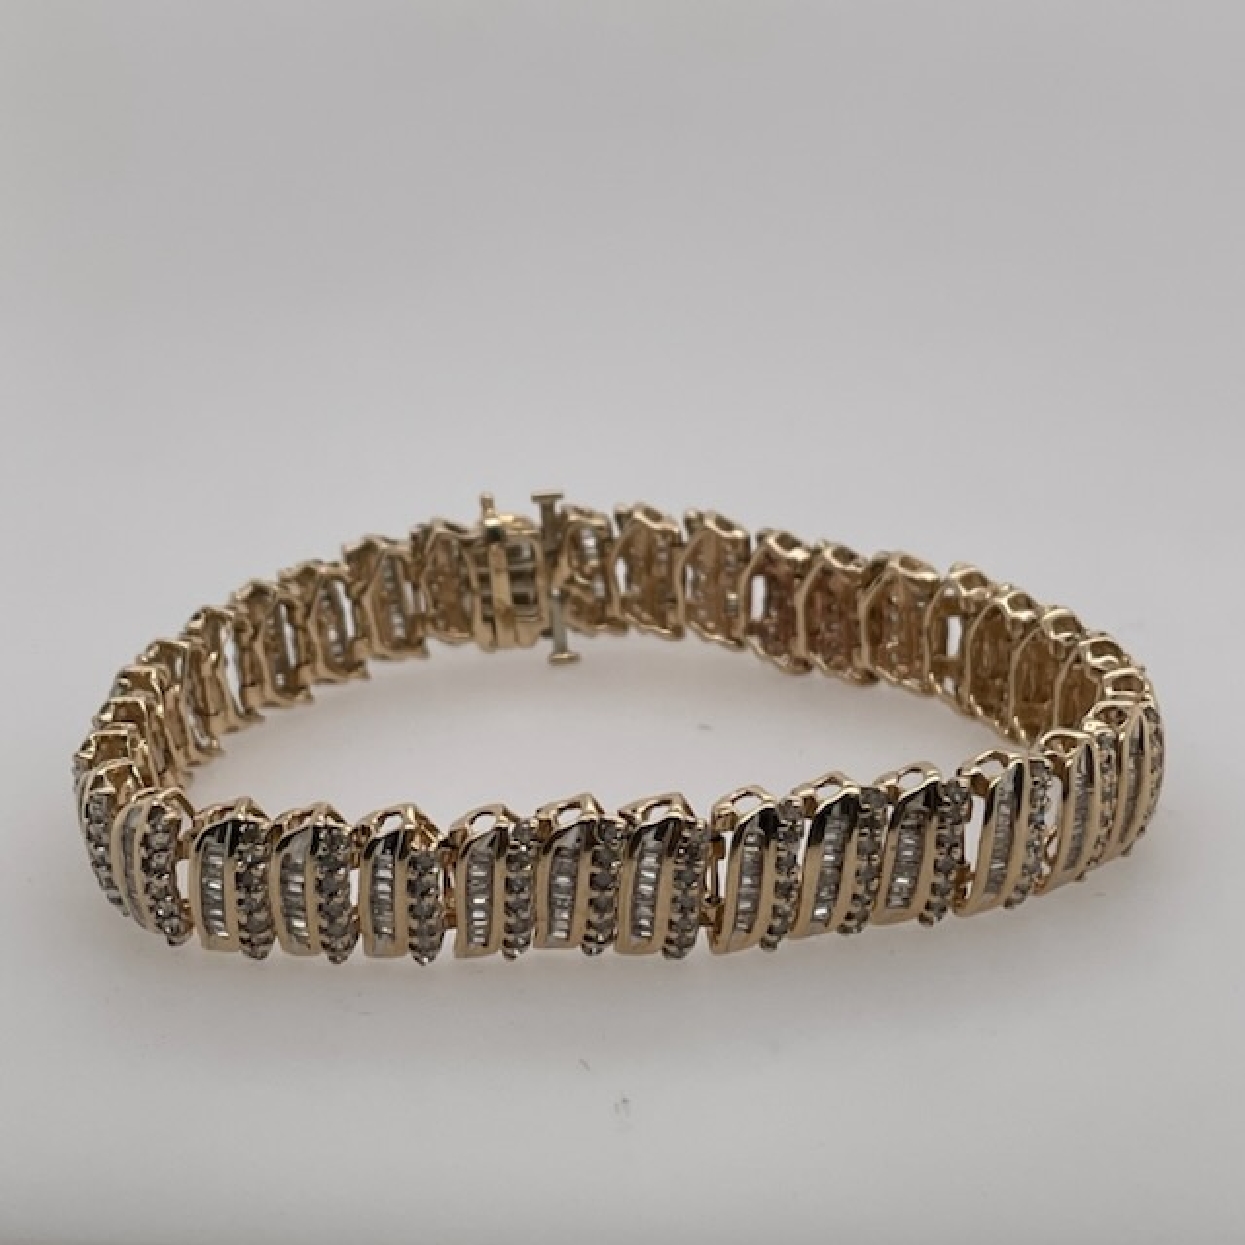 10k Yellow Gold Diamond Tennis Bracelet with Round and Baguette Diamonds 7 inches

2.55 CTTW